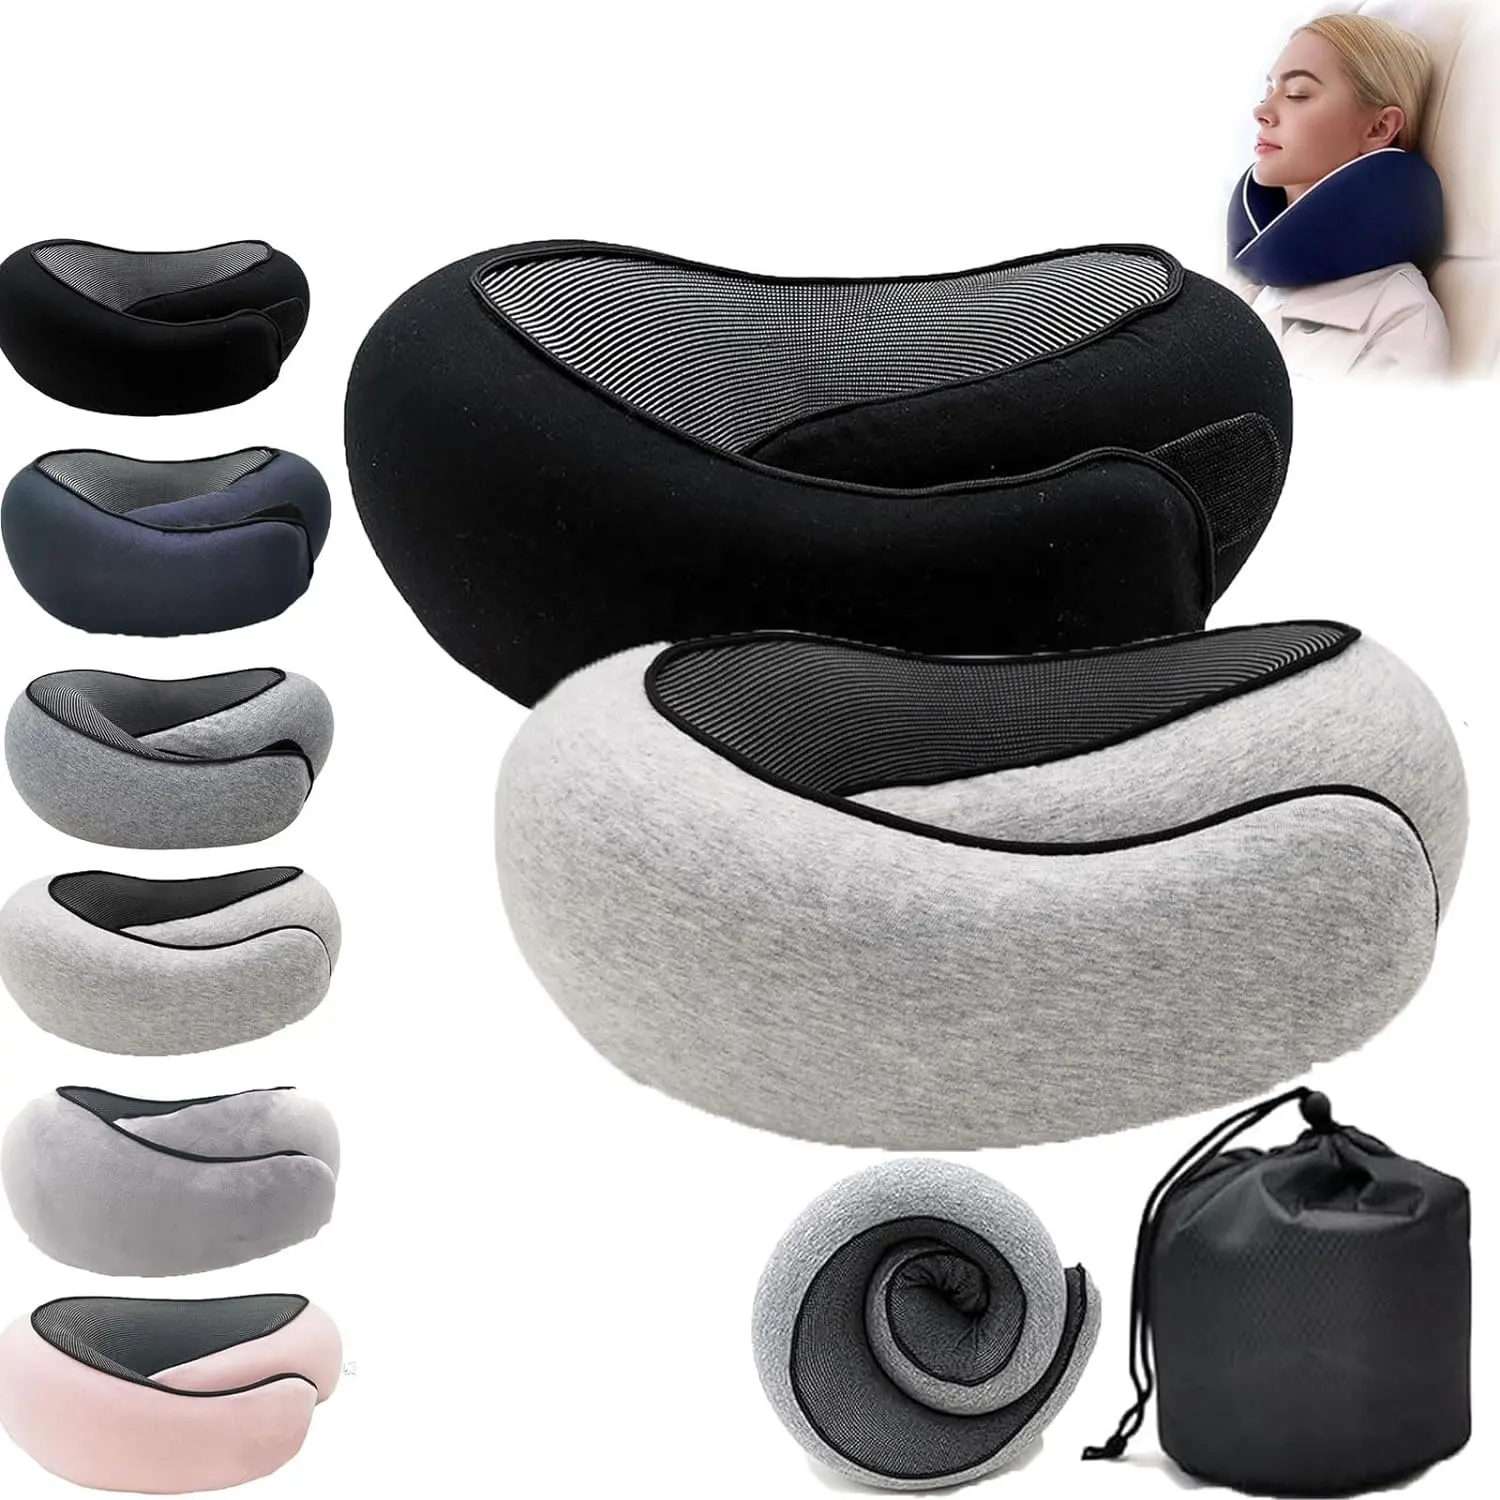 car cervical sleeping U shape Neck Support Memory Foam Travel Pillow For Airplane Car Home Office